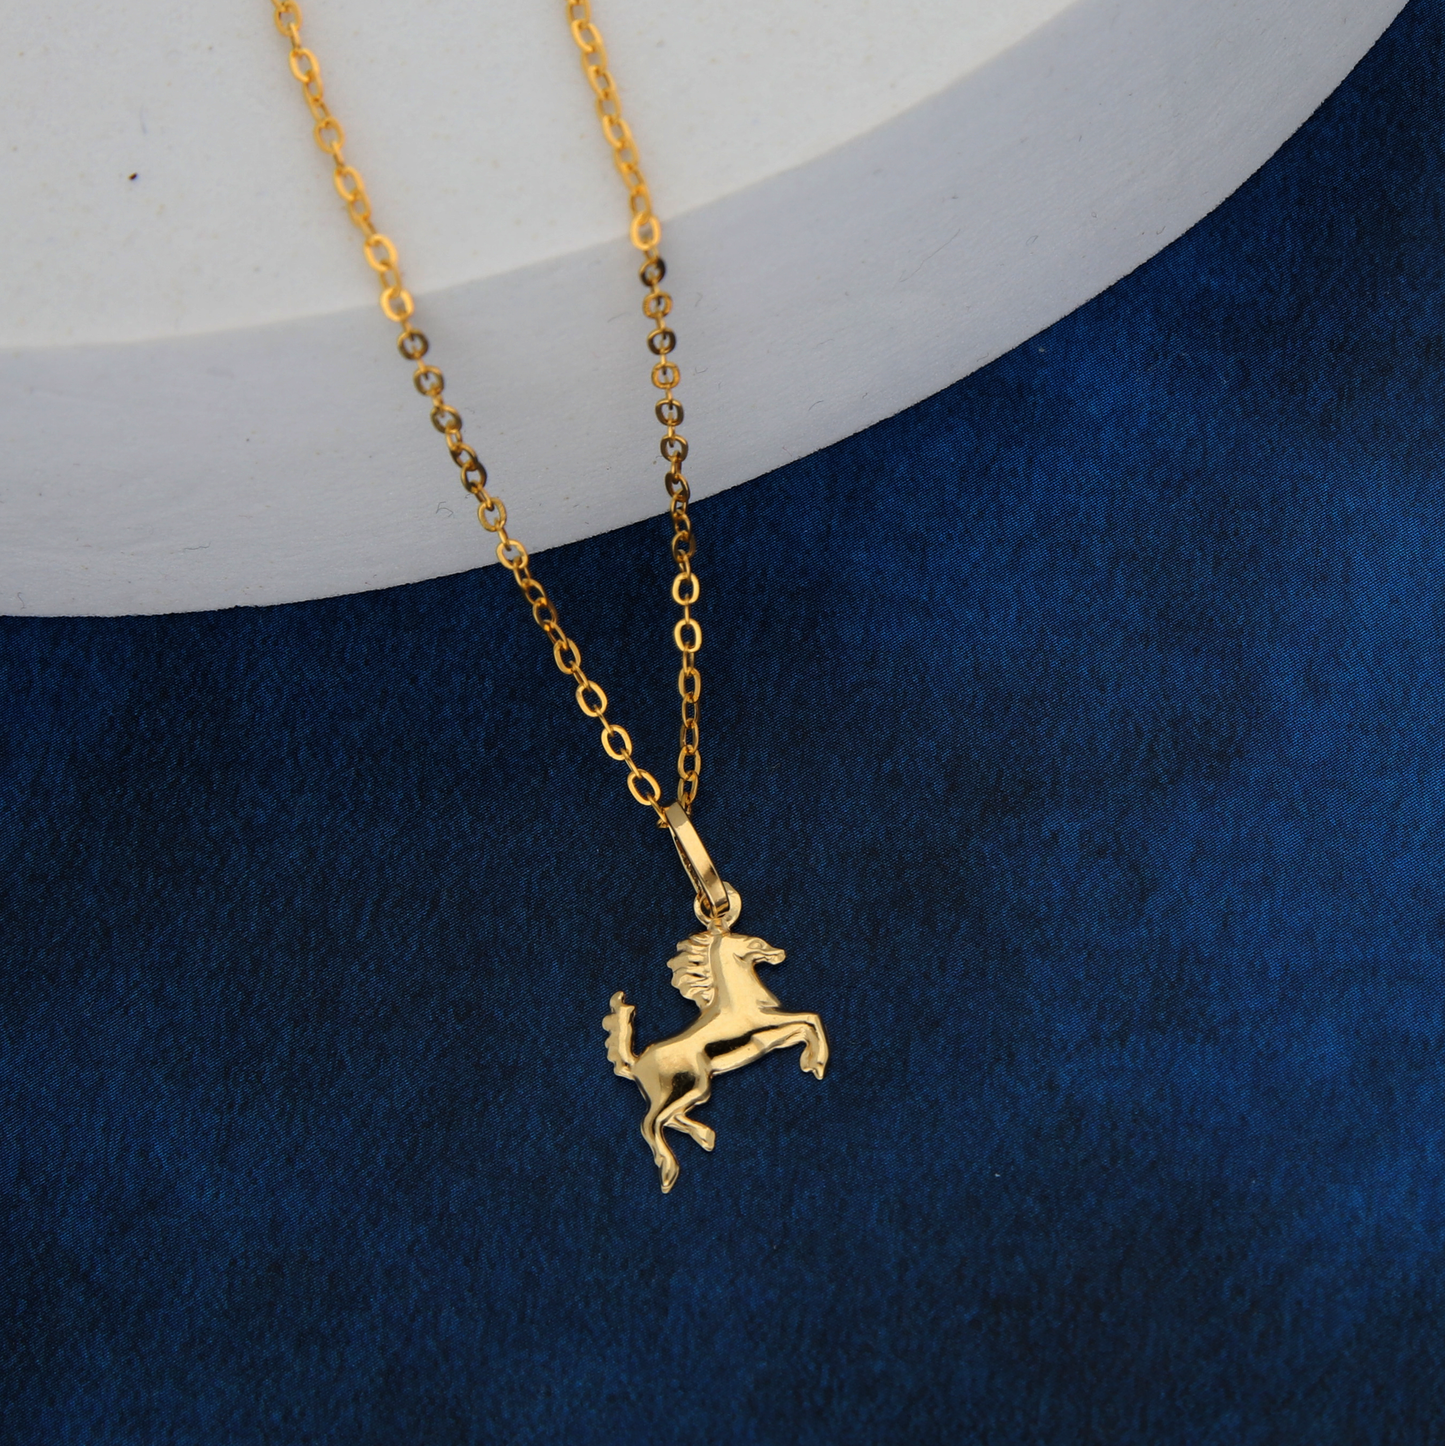 Gold Necklace (Chain with Horse Pendant) 18KT - FKJNKL18K9170